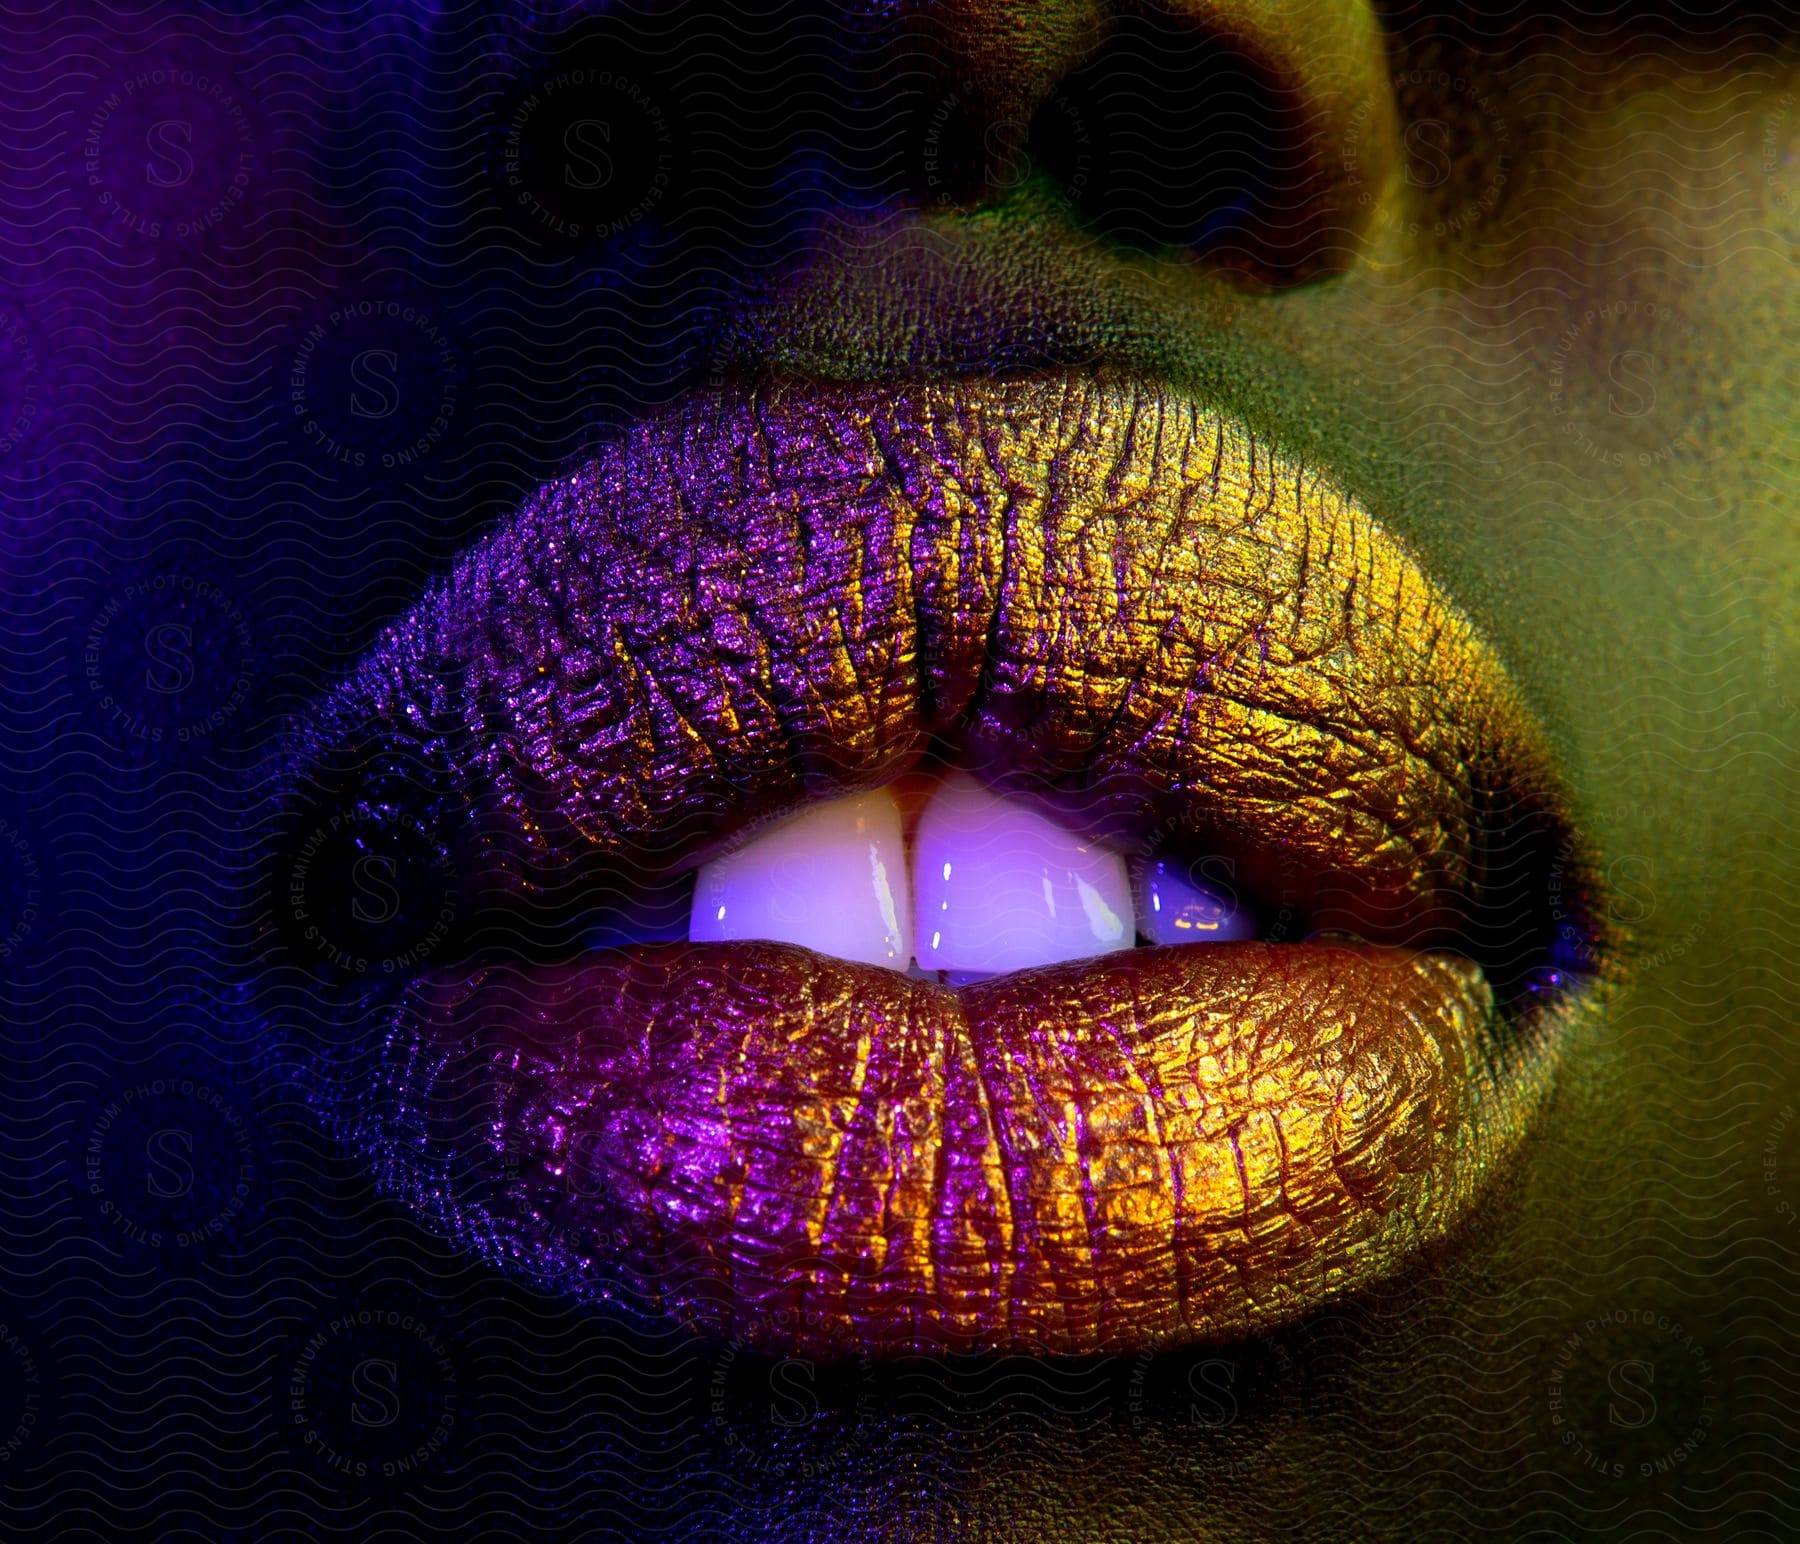 Stock photo of extreme close-up of a person's lips with lipstick.